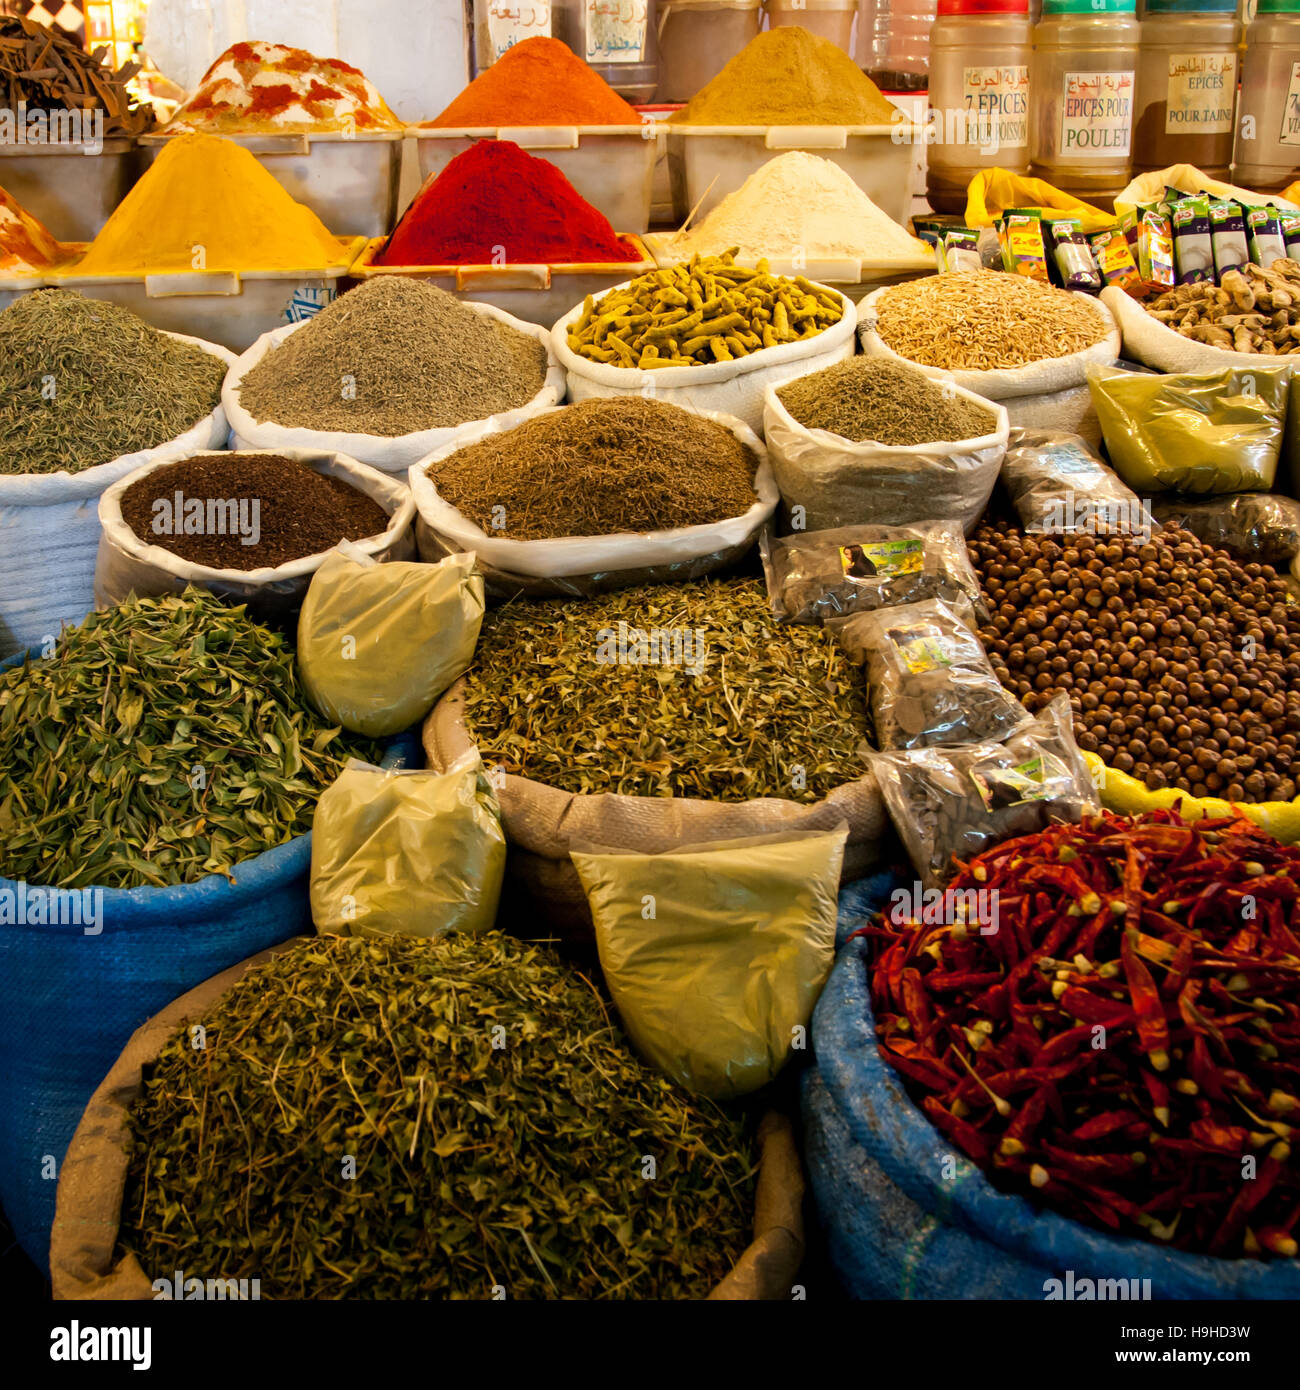 Market stand in Meknes, Marocco. Opulent spice backdrop: whether cinnamon bark, bay leaf, turmeric or chilli pepper, the fragrances pile up at Moroccan spice markets Stock Photo